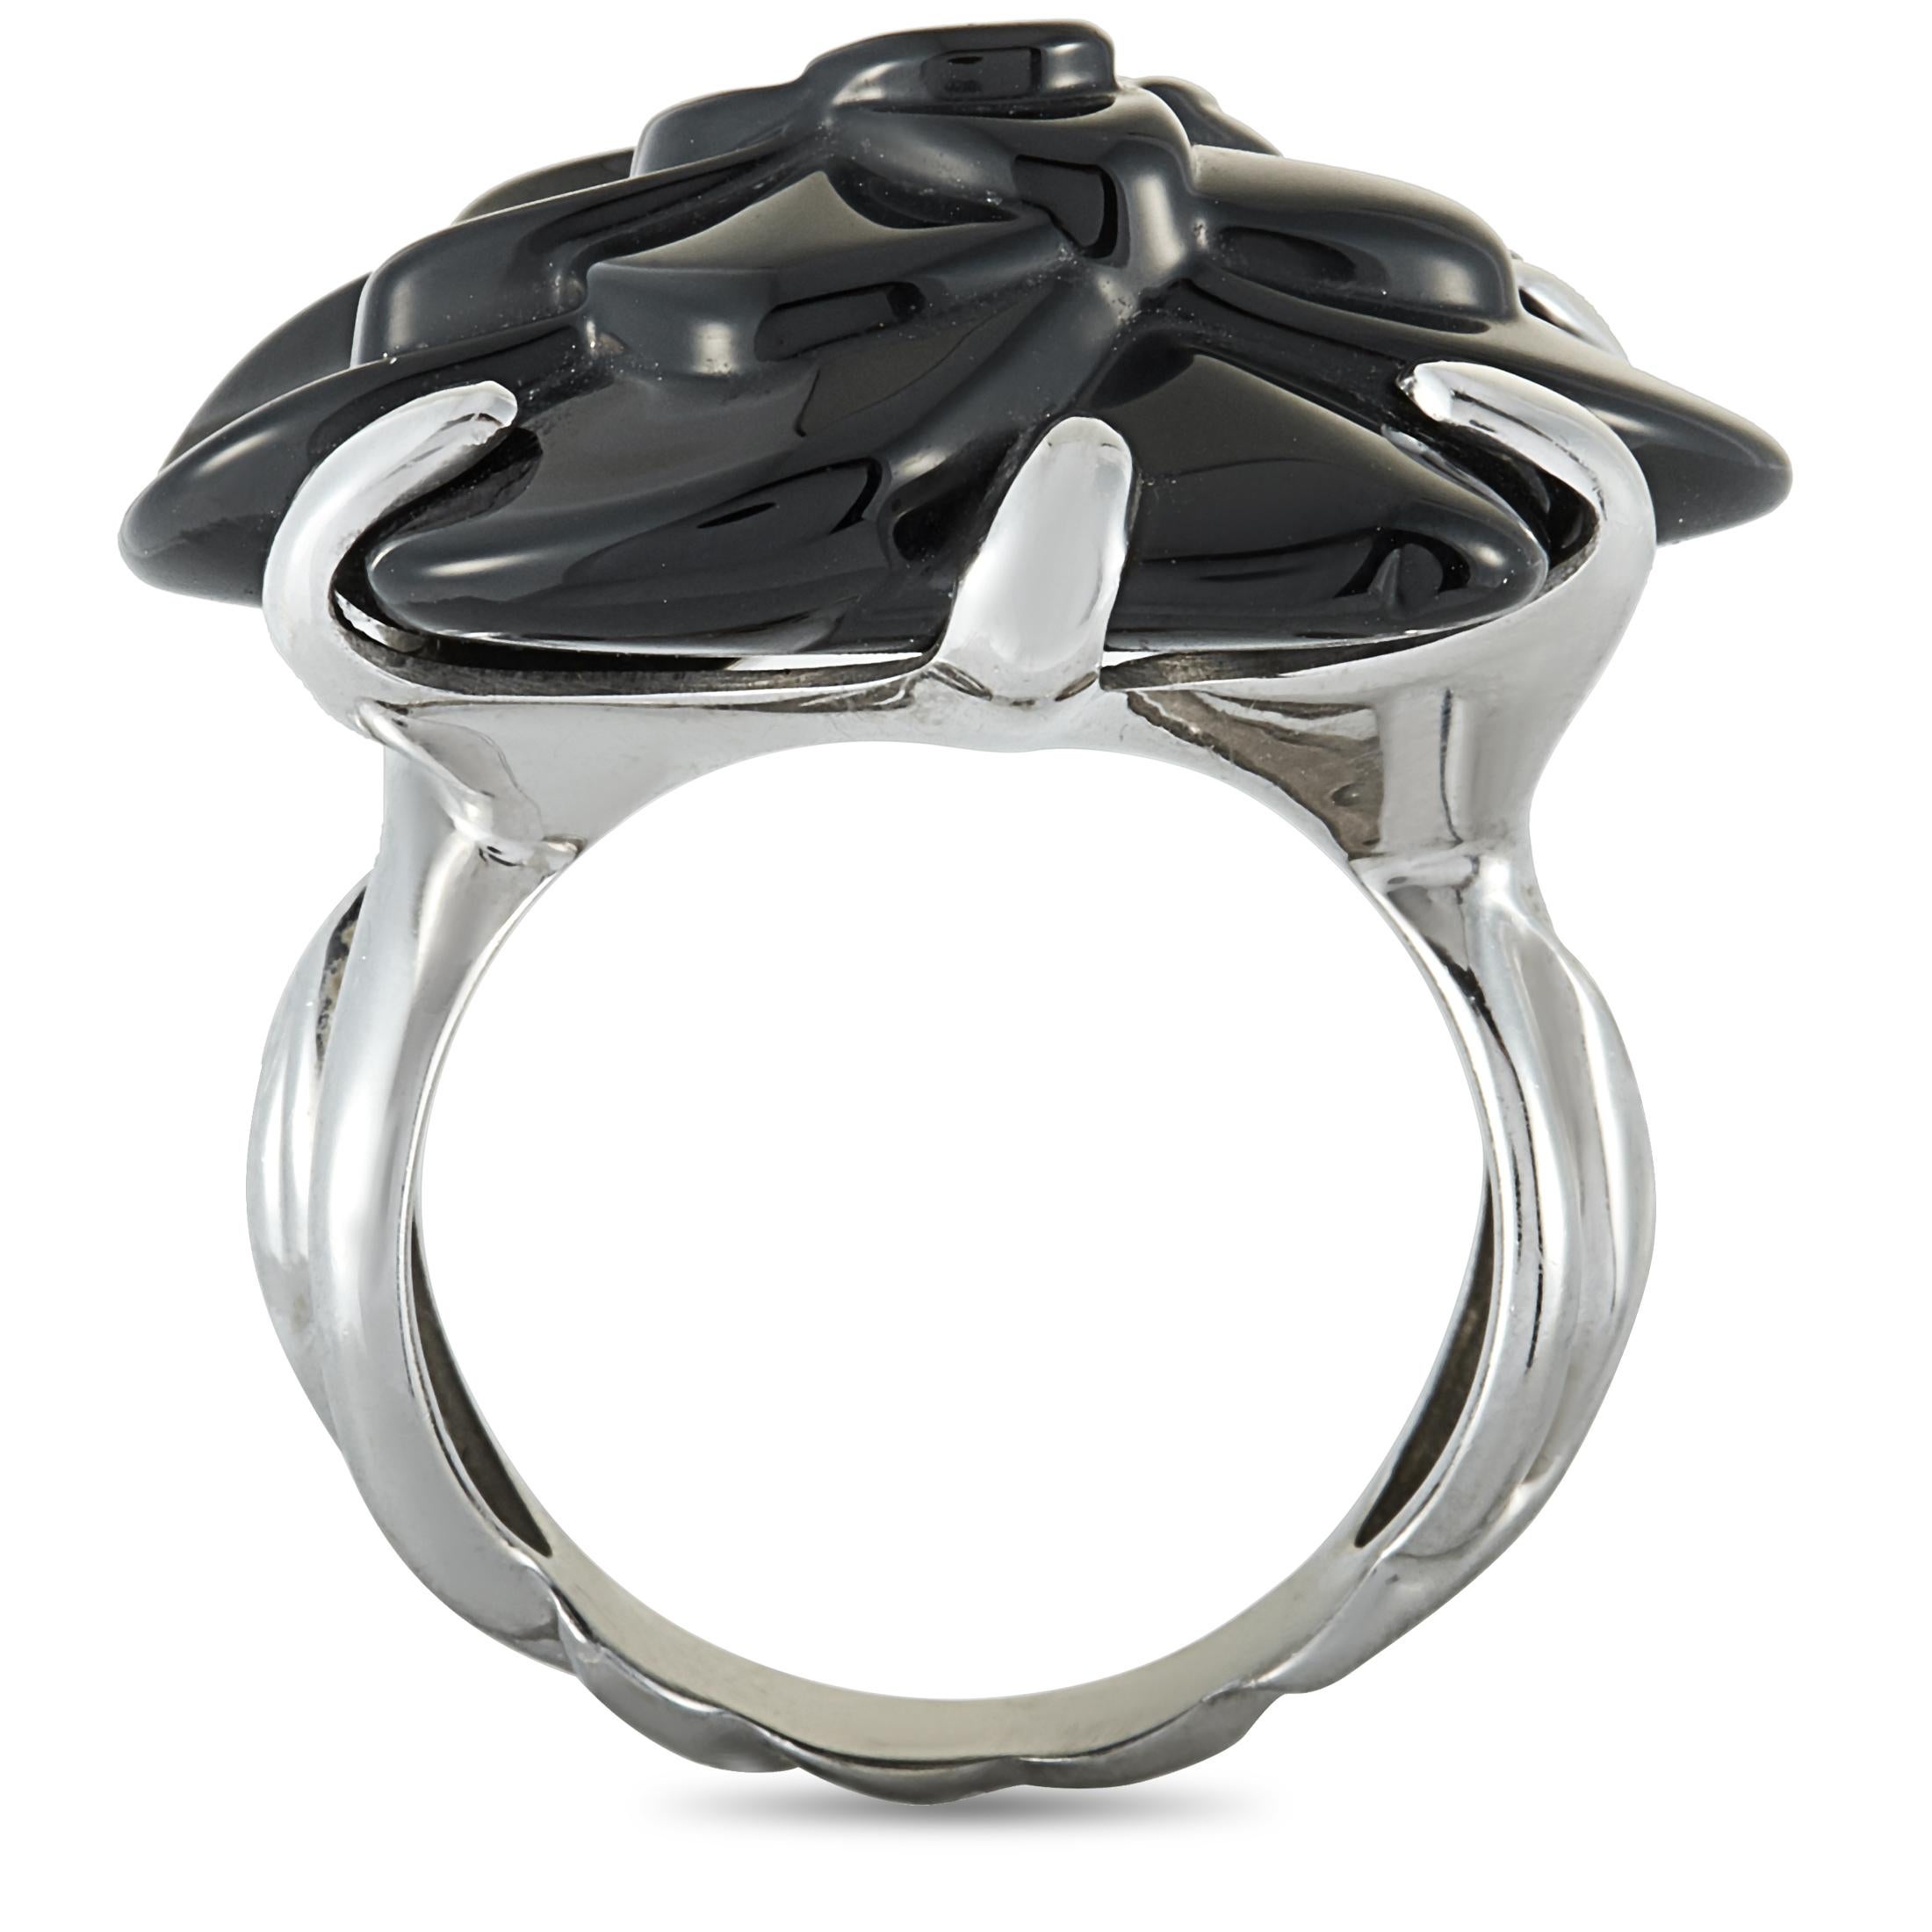 The Chanel “Camélia” ring is crafted from 18K white gold and set with an onyx. The ring weighs 11.9 grams, boasting band thickness of 4 mm and top height of 11 mm, while top dimensions measure 25 by 24 mm.

This jewelry piece is offered in estate